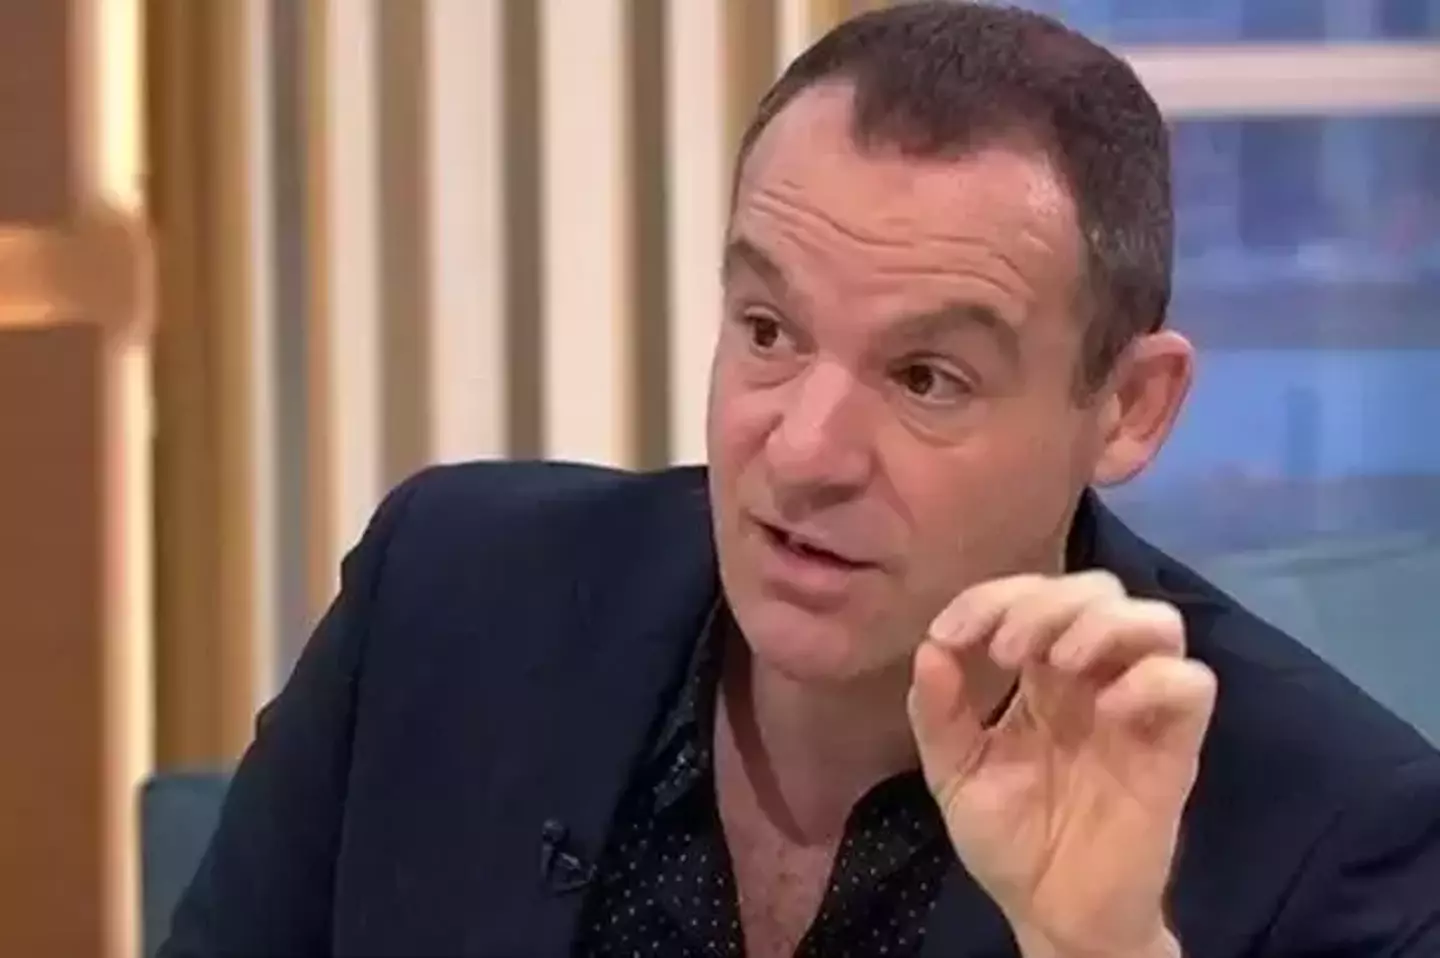 Martin Lewis has warned of 'demon appliances' in your home.